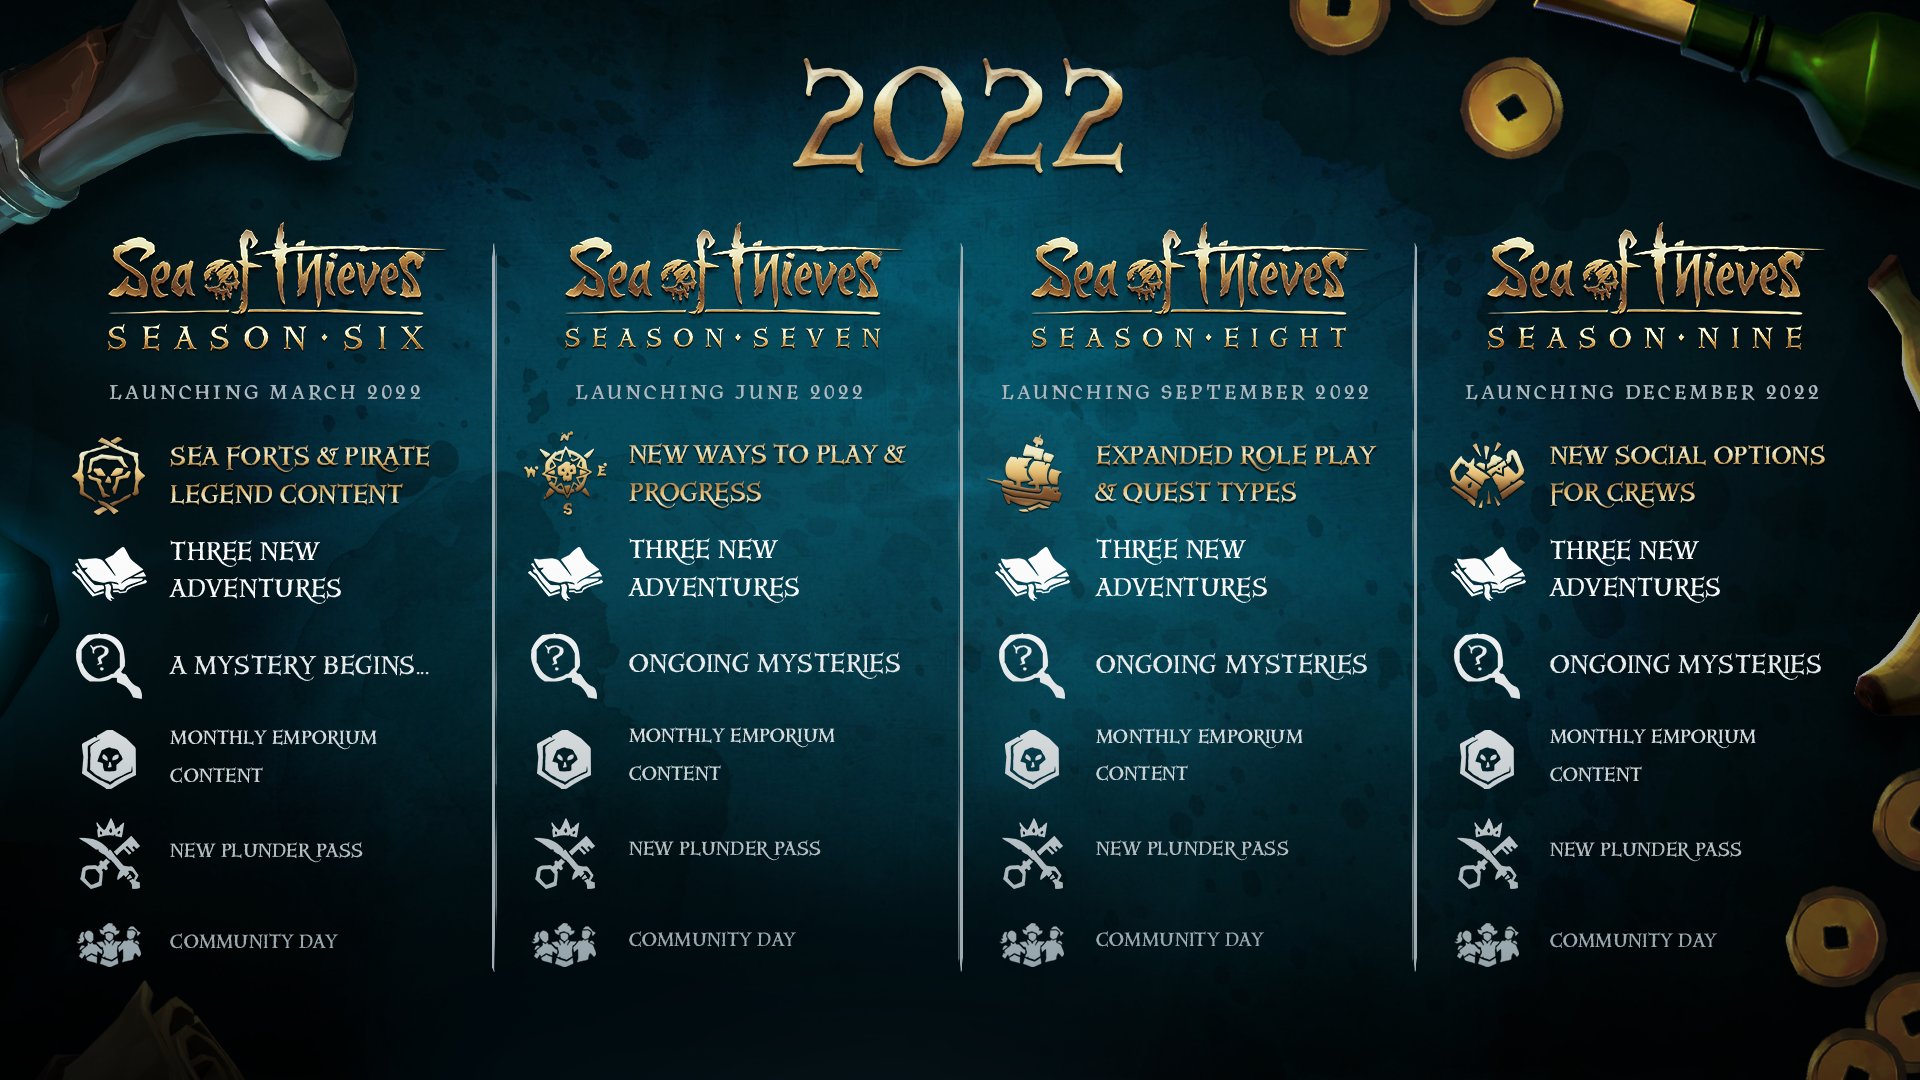 Four columns and a header "2022" are surrounded by pirate paraphernalia, including bottles, gold and a blunderbuss. The first column reads: "Sea of Thieves Season Six, launching March 2022. Sea Forts & Pirate Legend Content" Second column reads: "Sea of Thieves Season Seven, launching June 2022. New Ways to Play & Progress". Third column reads: "Sea of Thieves Season Eight, launching September 2022. Expanded Role Play & Quest Types". Fourth column reads: "Sea of Thieves Season Nine, launching December 2022. New Social Options for Crews". All columns contain the following: "Three New Adventures, Ongoing Mysteries, Monthly Emporium Content, New Plunder Pass and Community Day".